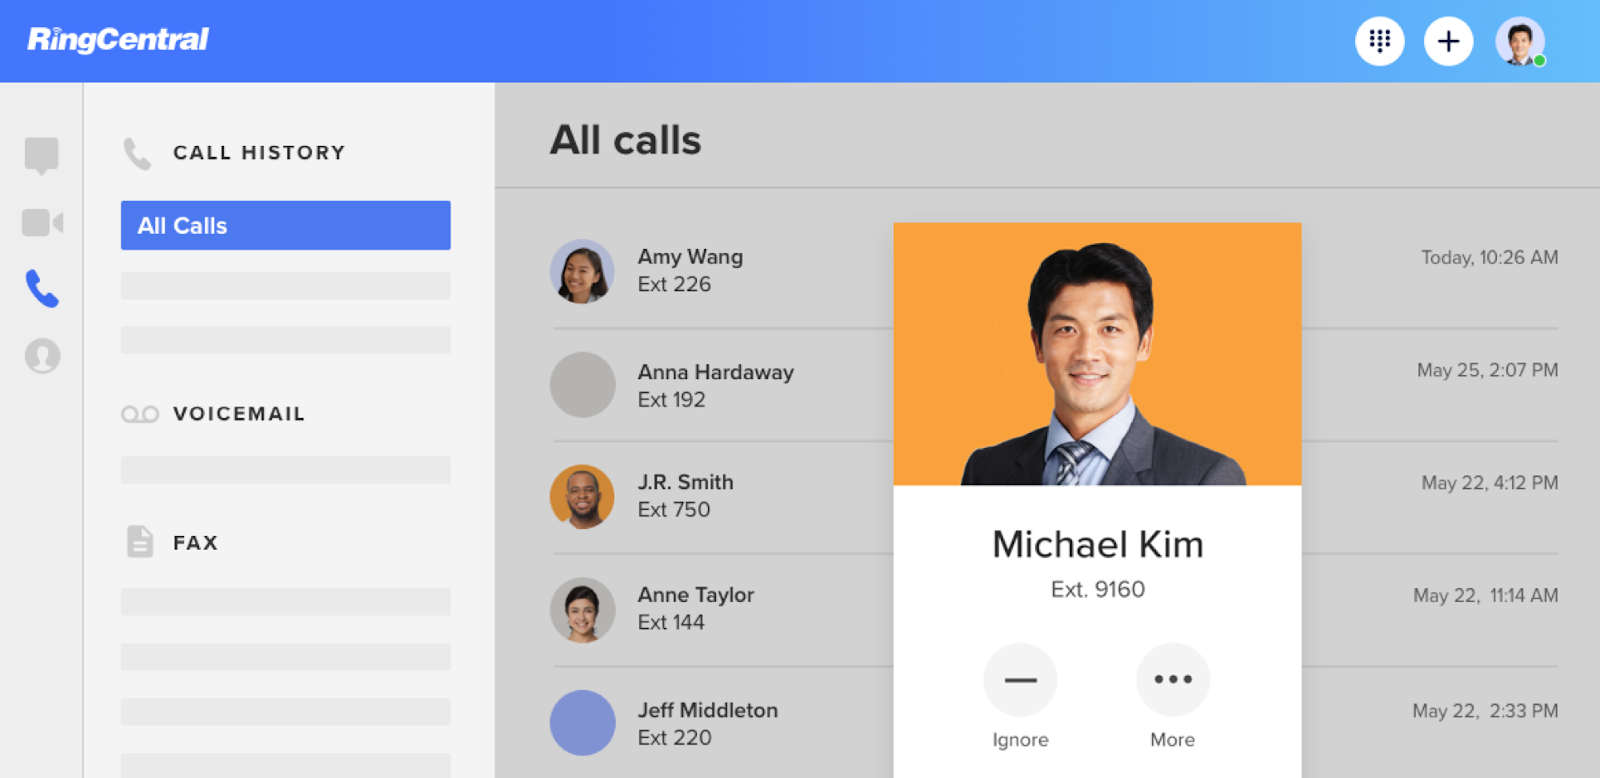 Ringcentral for call center automation